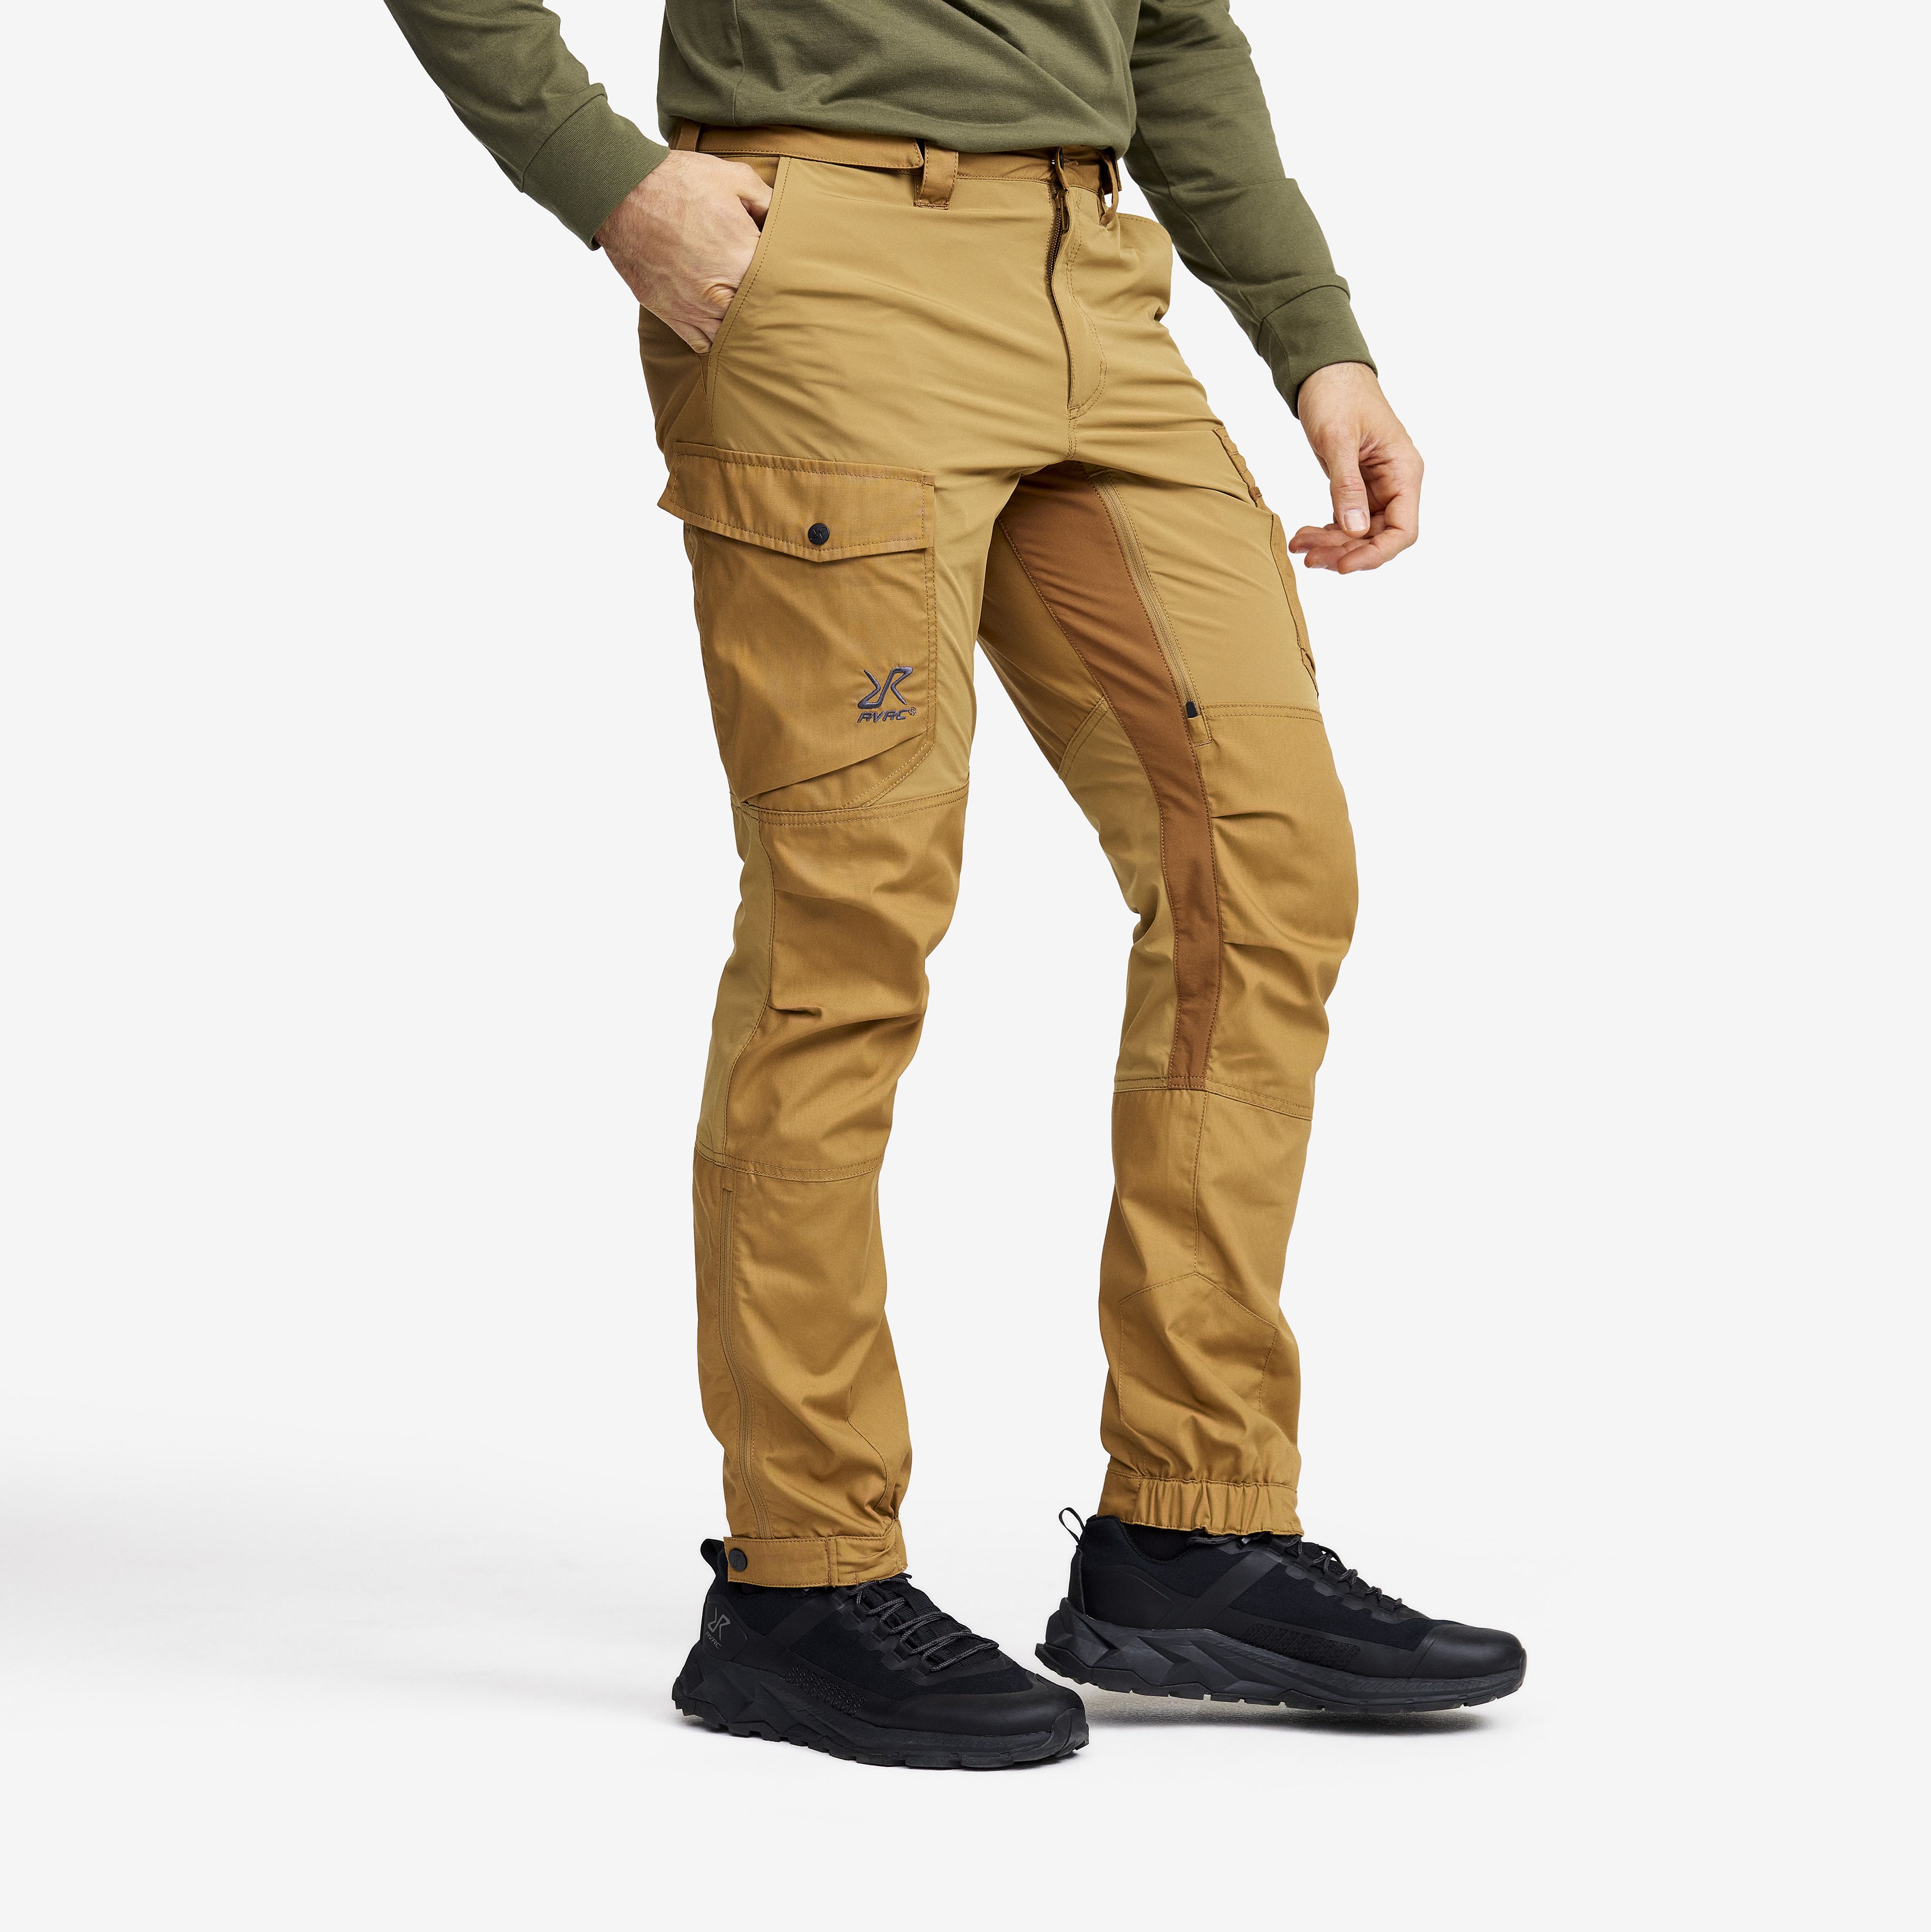 The ultimate guide to men's walking trousers 2023 - Ramblers